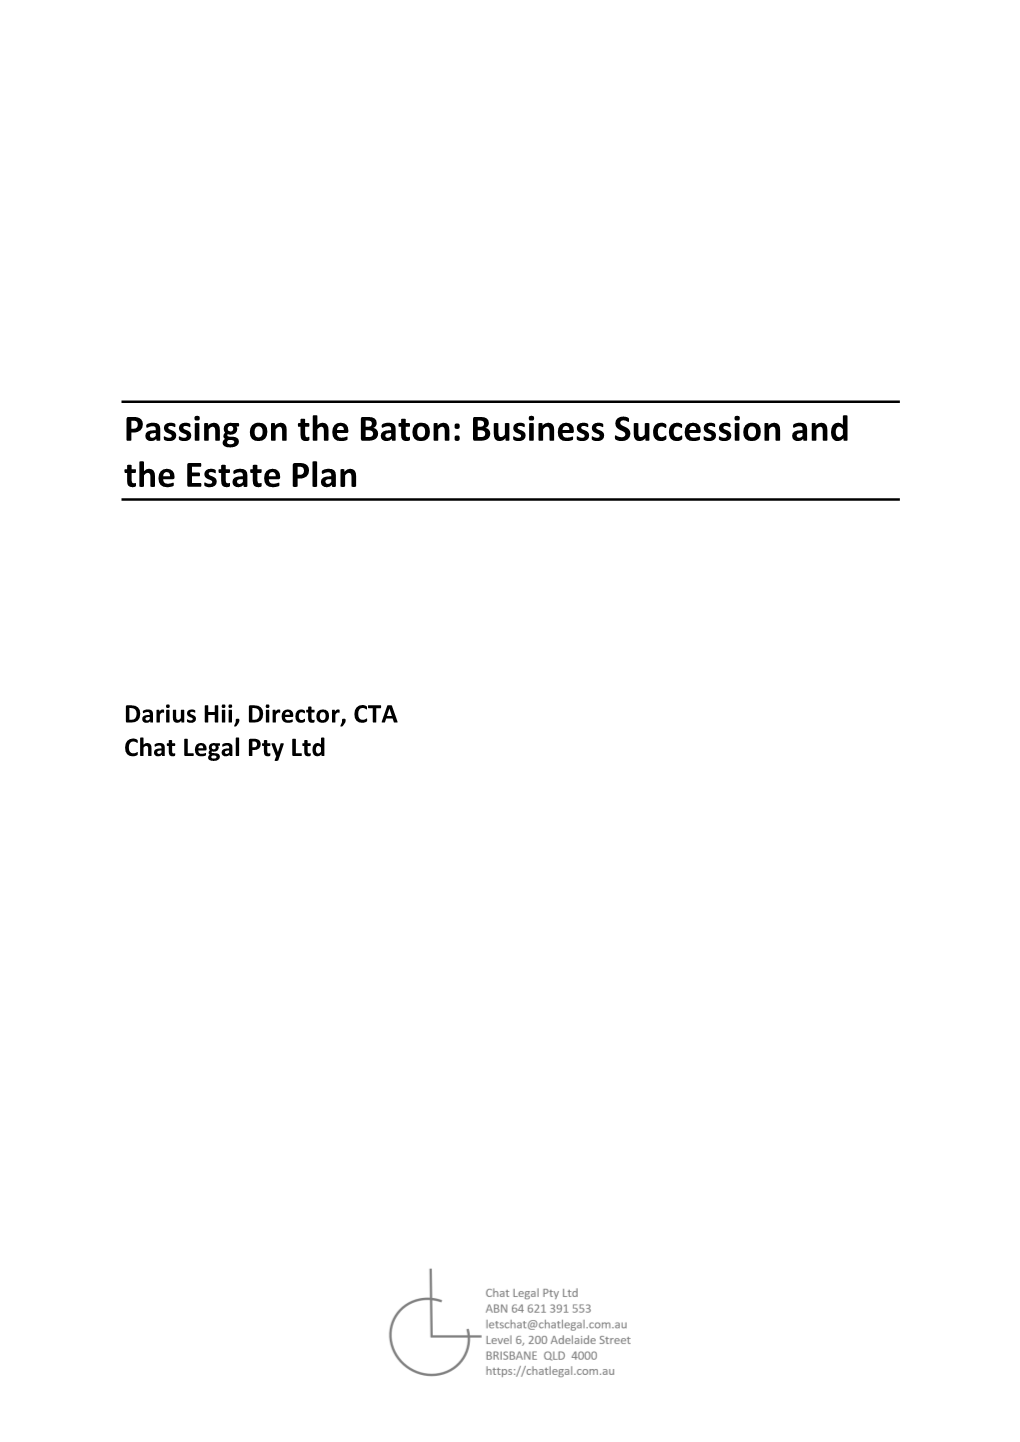 Passing on the Baton: Business Succession and the Estate Plan